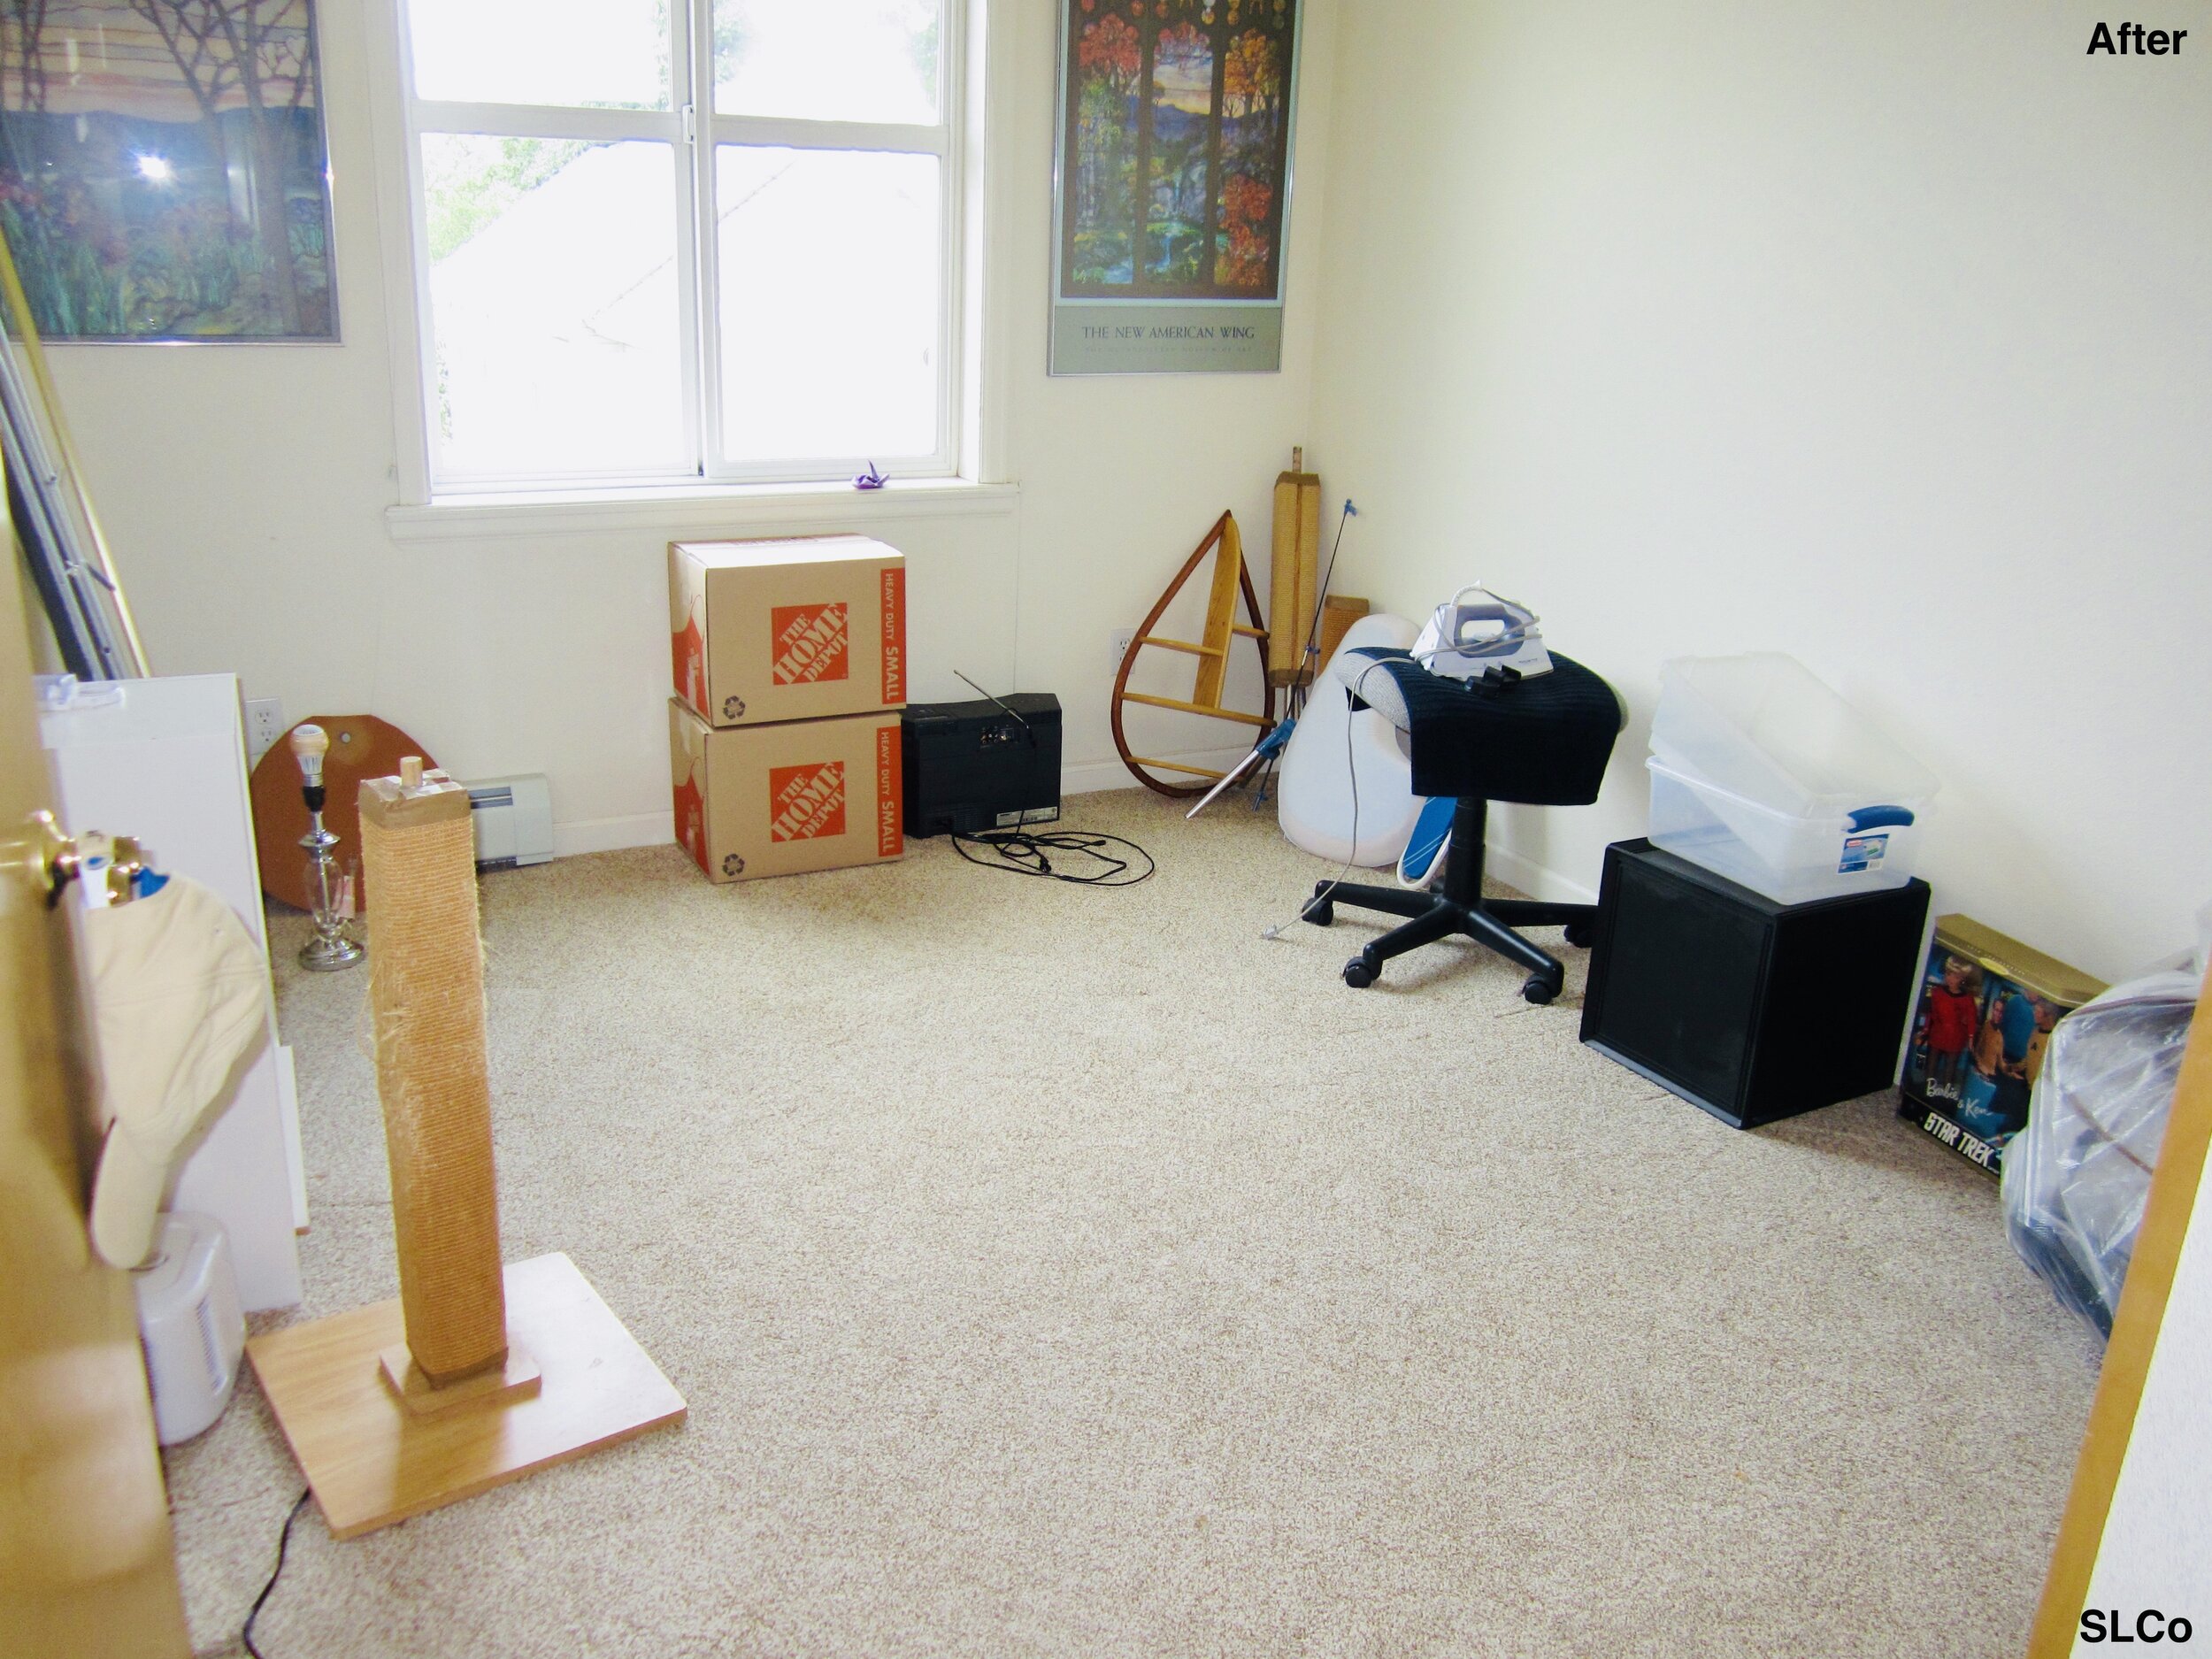 Room with white calls with  boxes unpacked, some boxes stacked along wall, and floor clear.